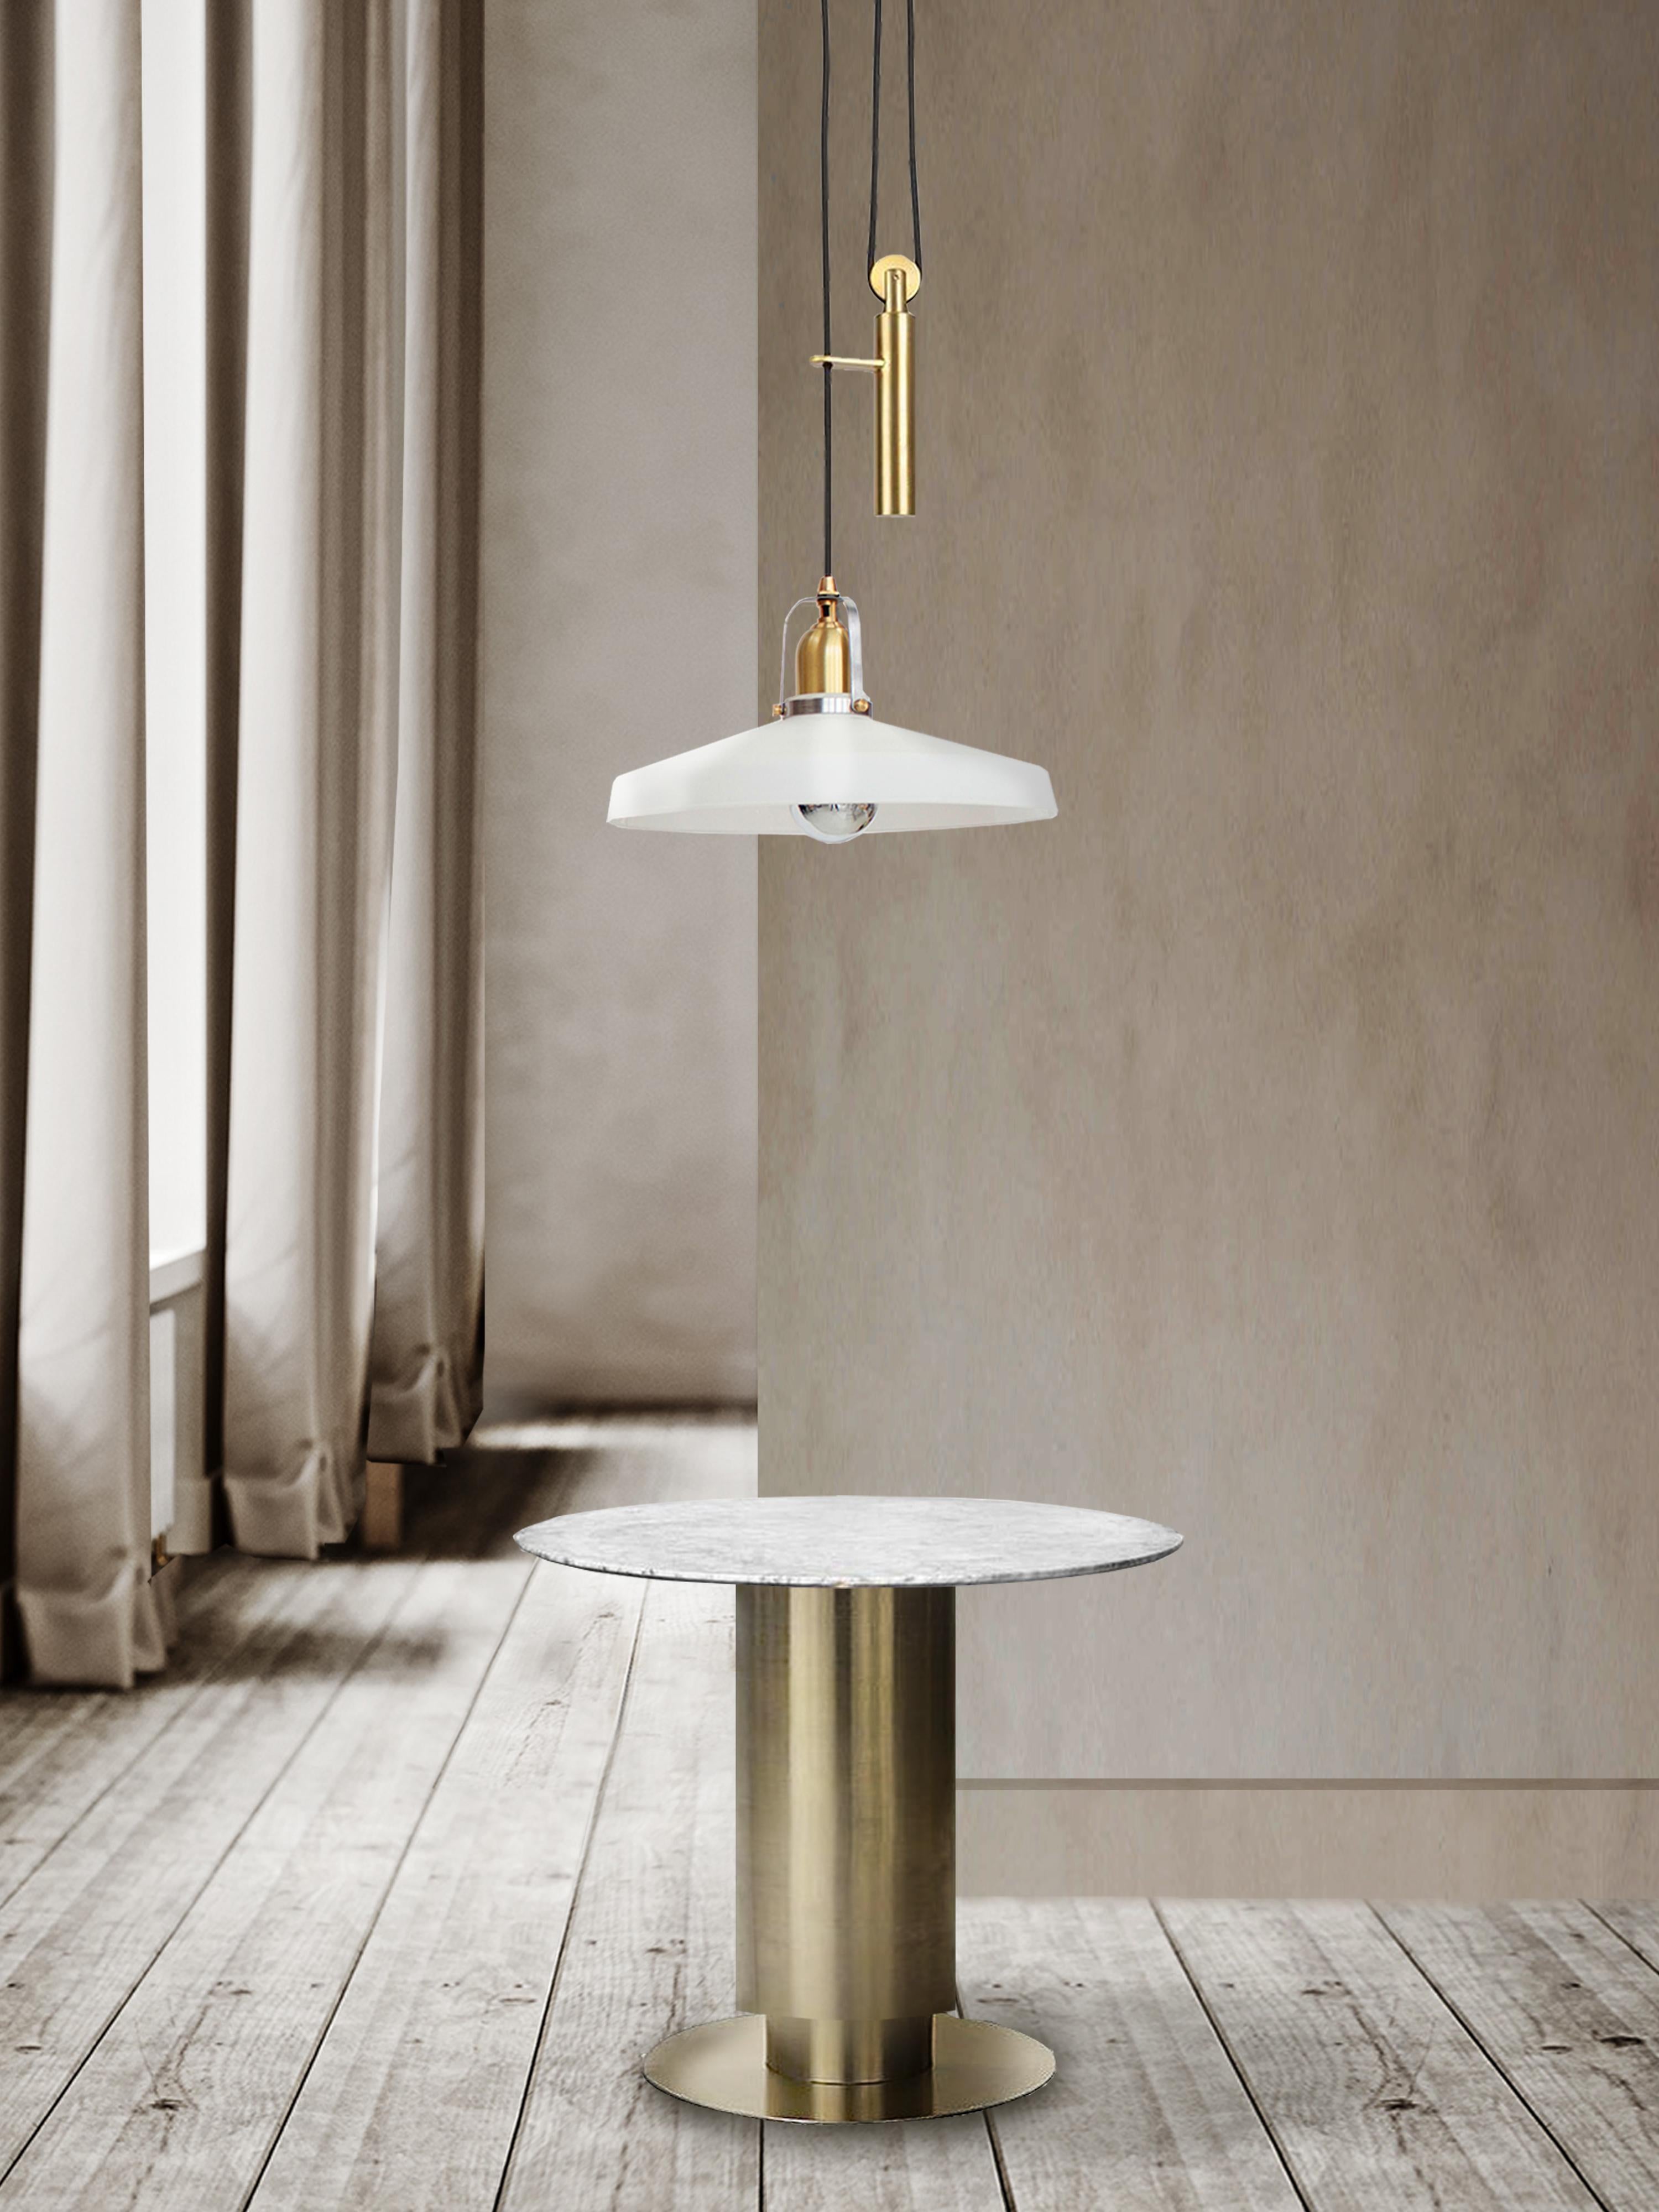 Striking a beautiful balance between functionality and aesthetic, the Holt pendant, hand made in Prague and London, uses subtle detailing and a well considered material pallet of warm brushed metals with whitened crystal glass to create an aesthetic